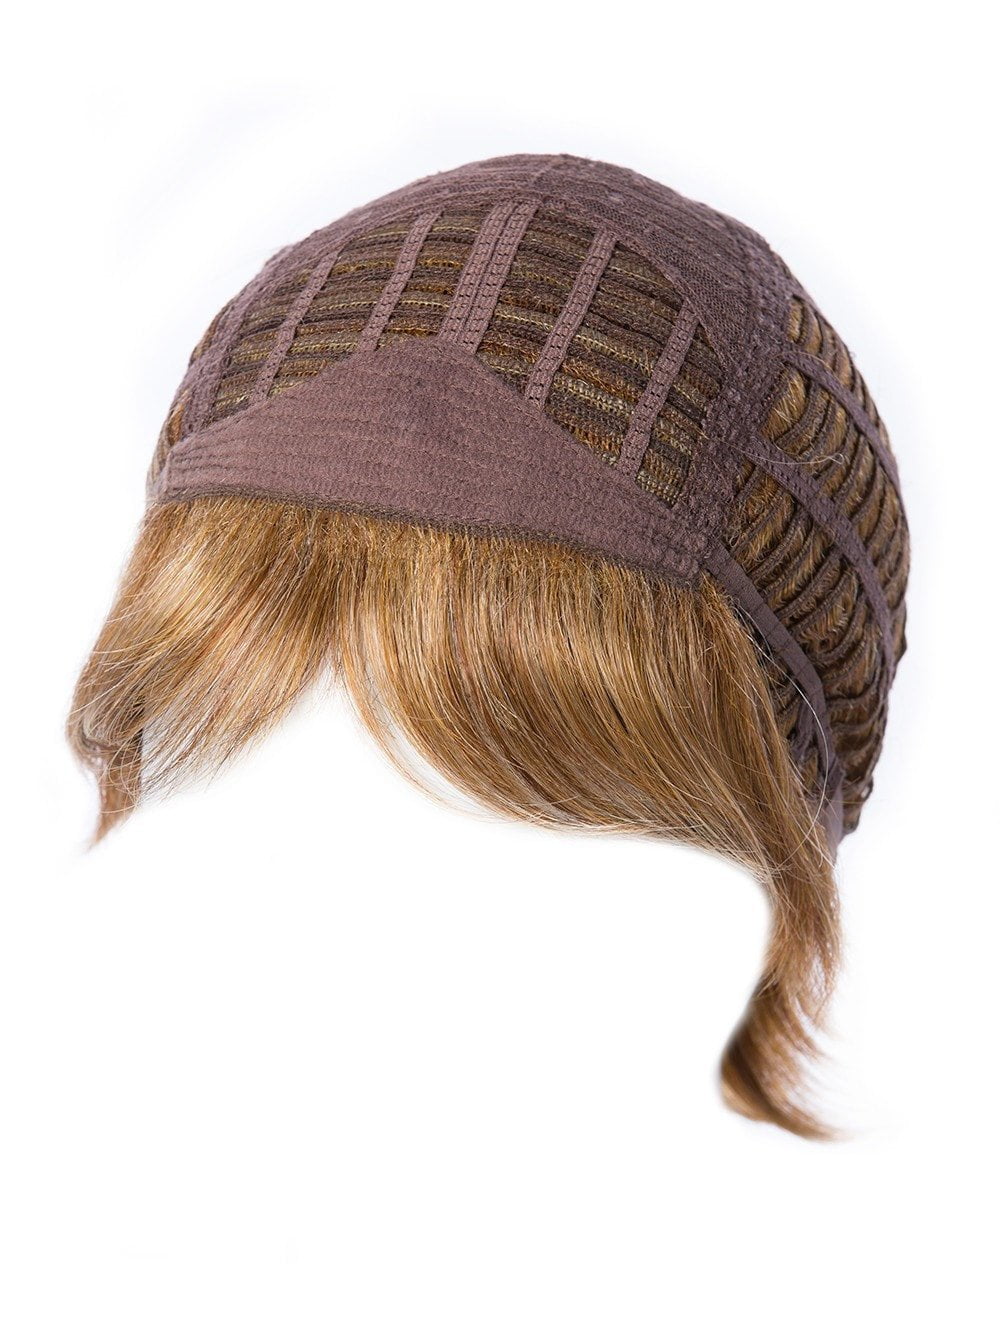 Basic Cap, also known as a capless or traditional construction, has open wefting